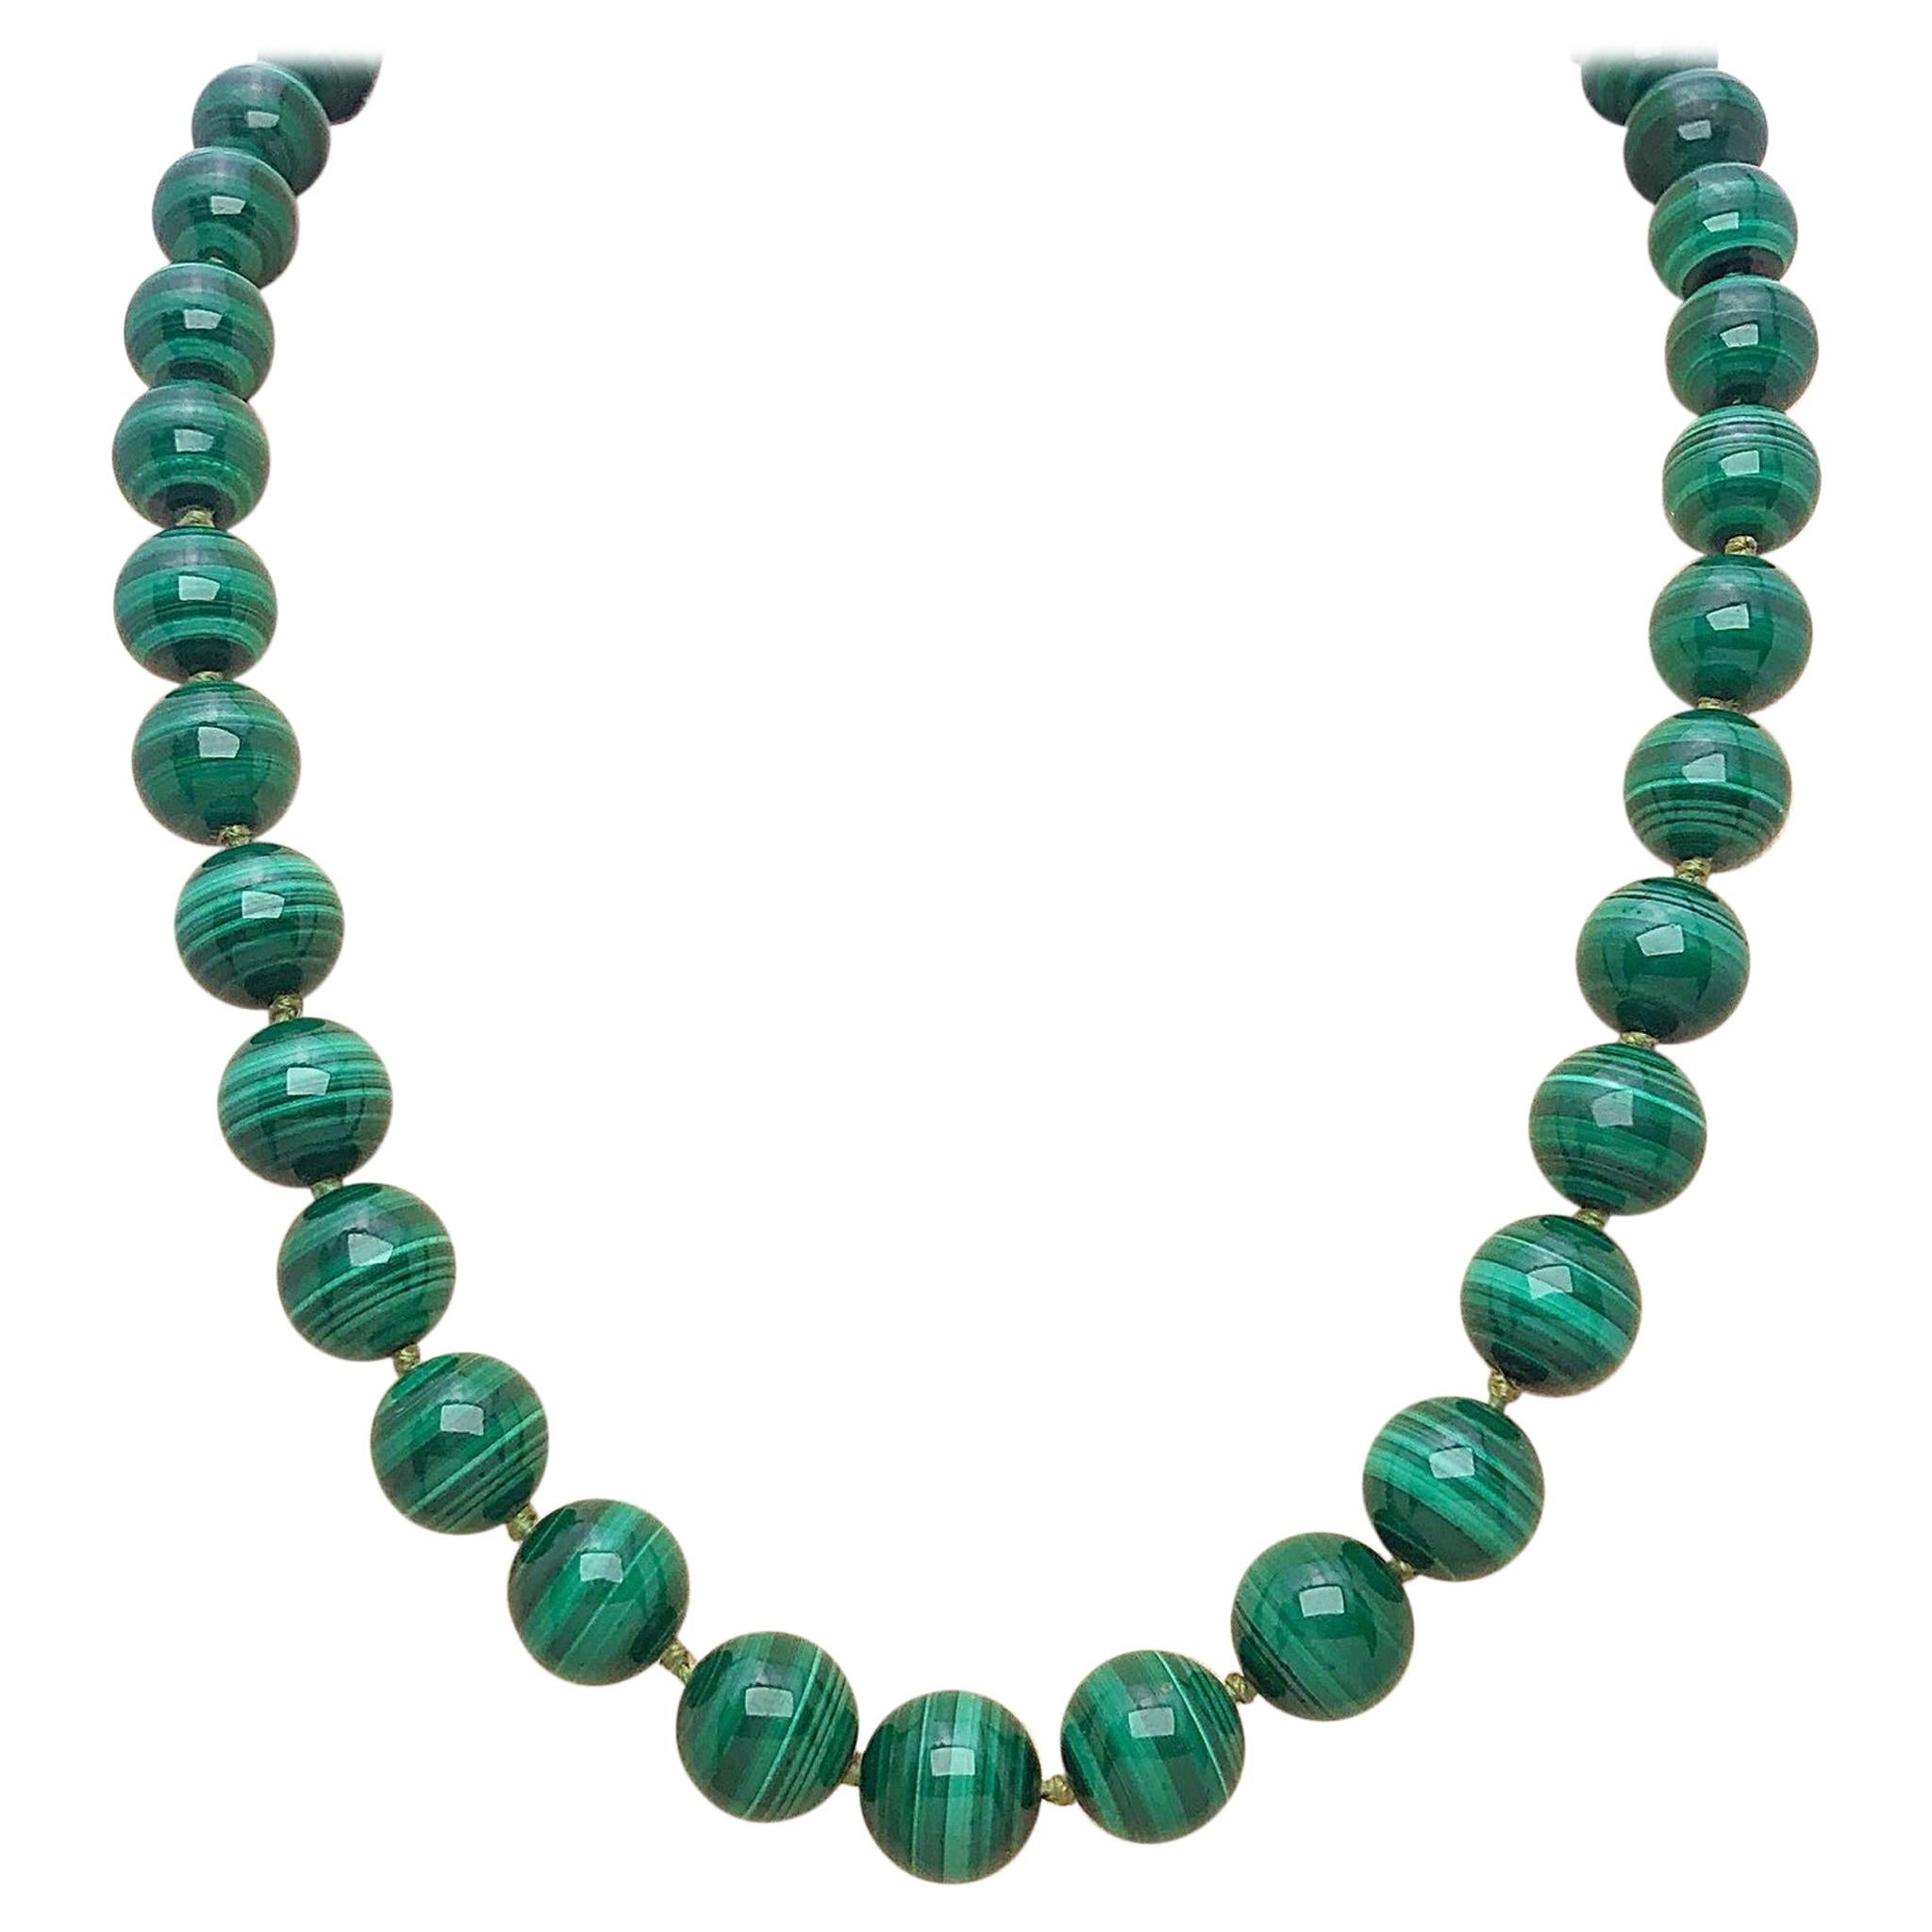 Matinee Length Polished Malachite Beaded Necklace with 14 Karat Gold Clasp